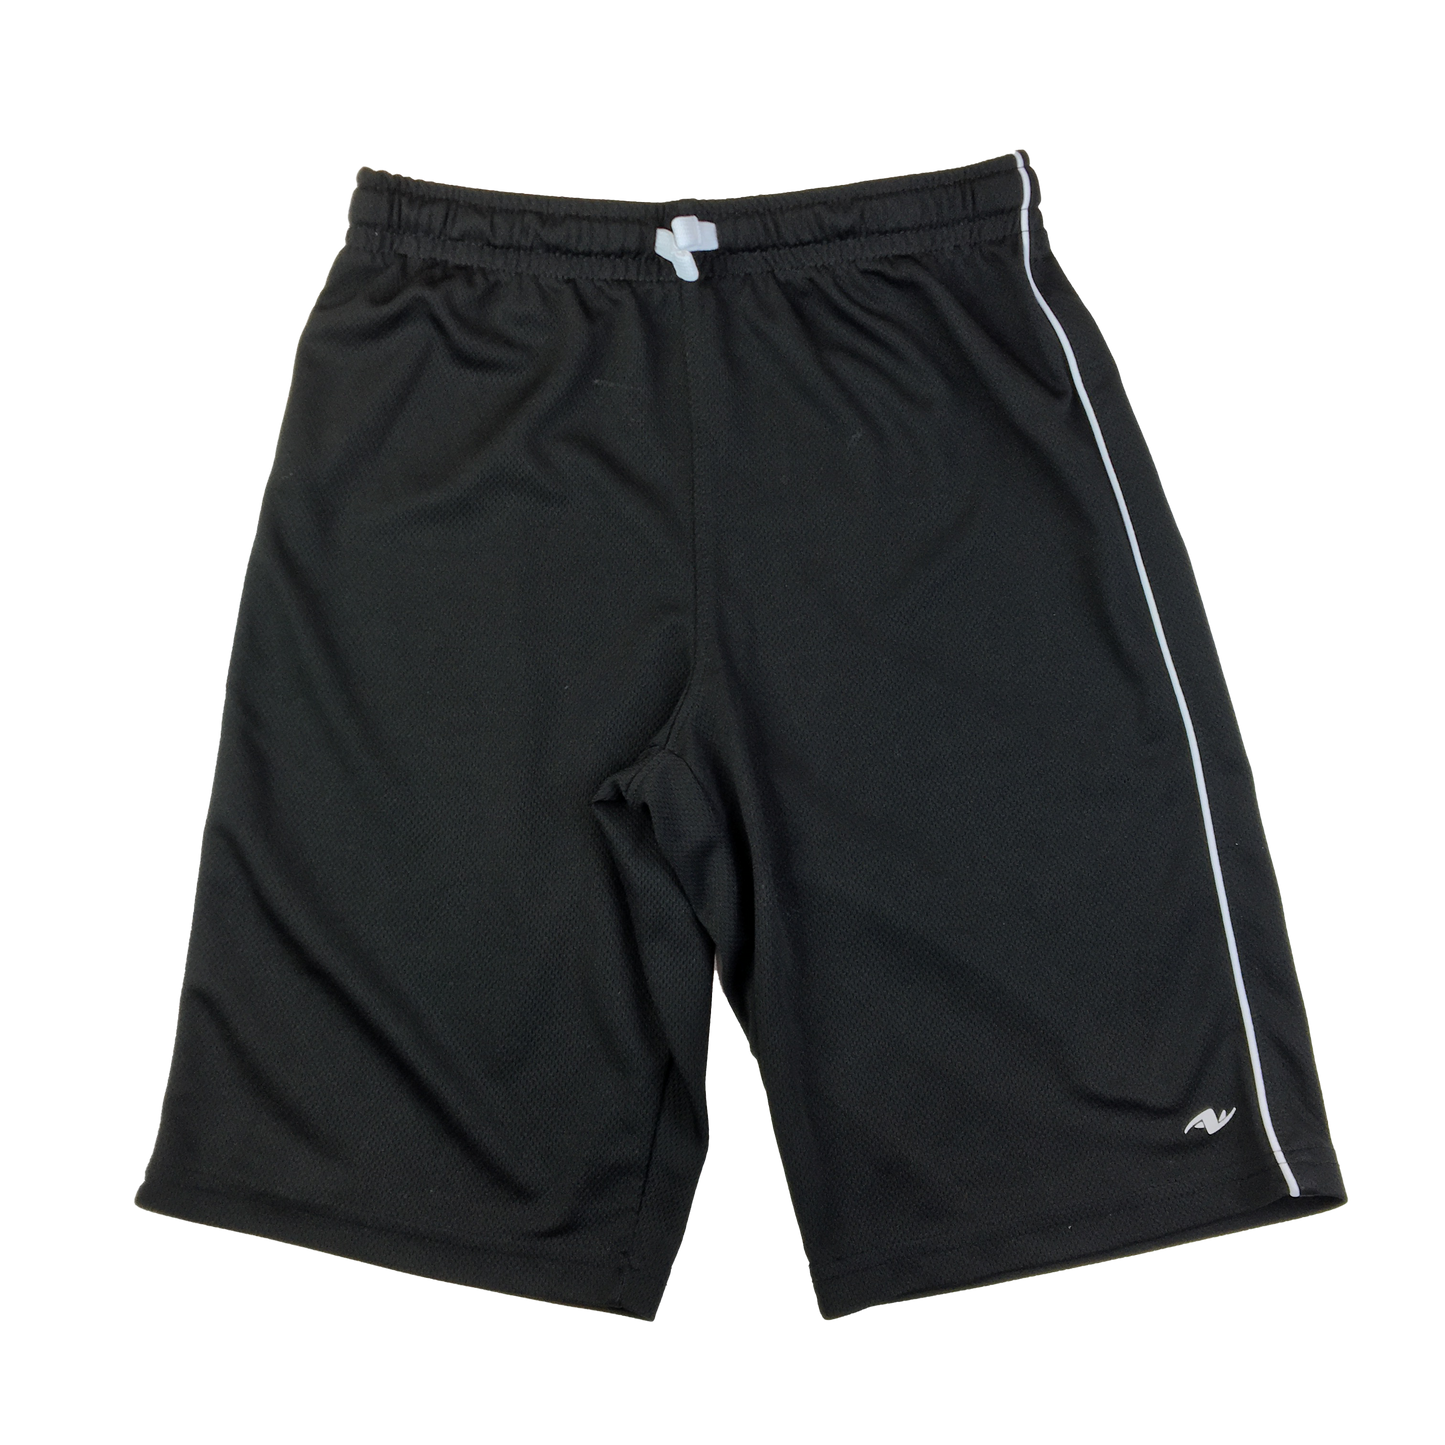 Athletic Works Black Shorts with White Side Stripe 14-16